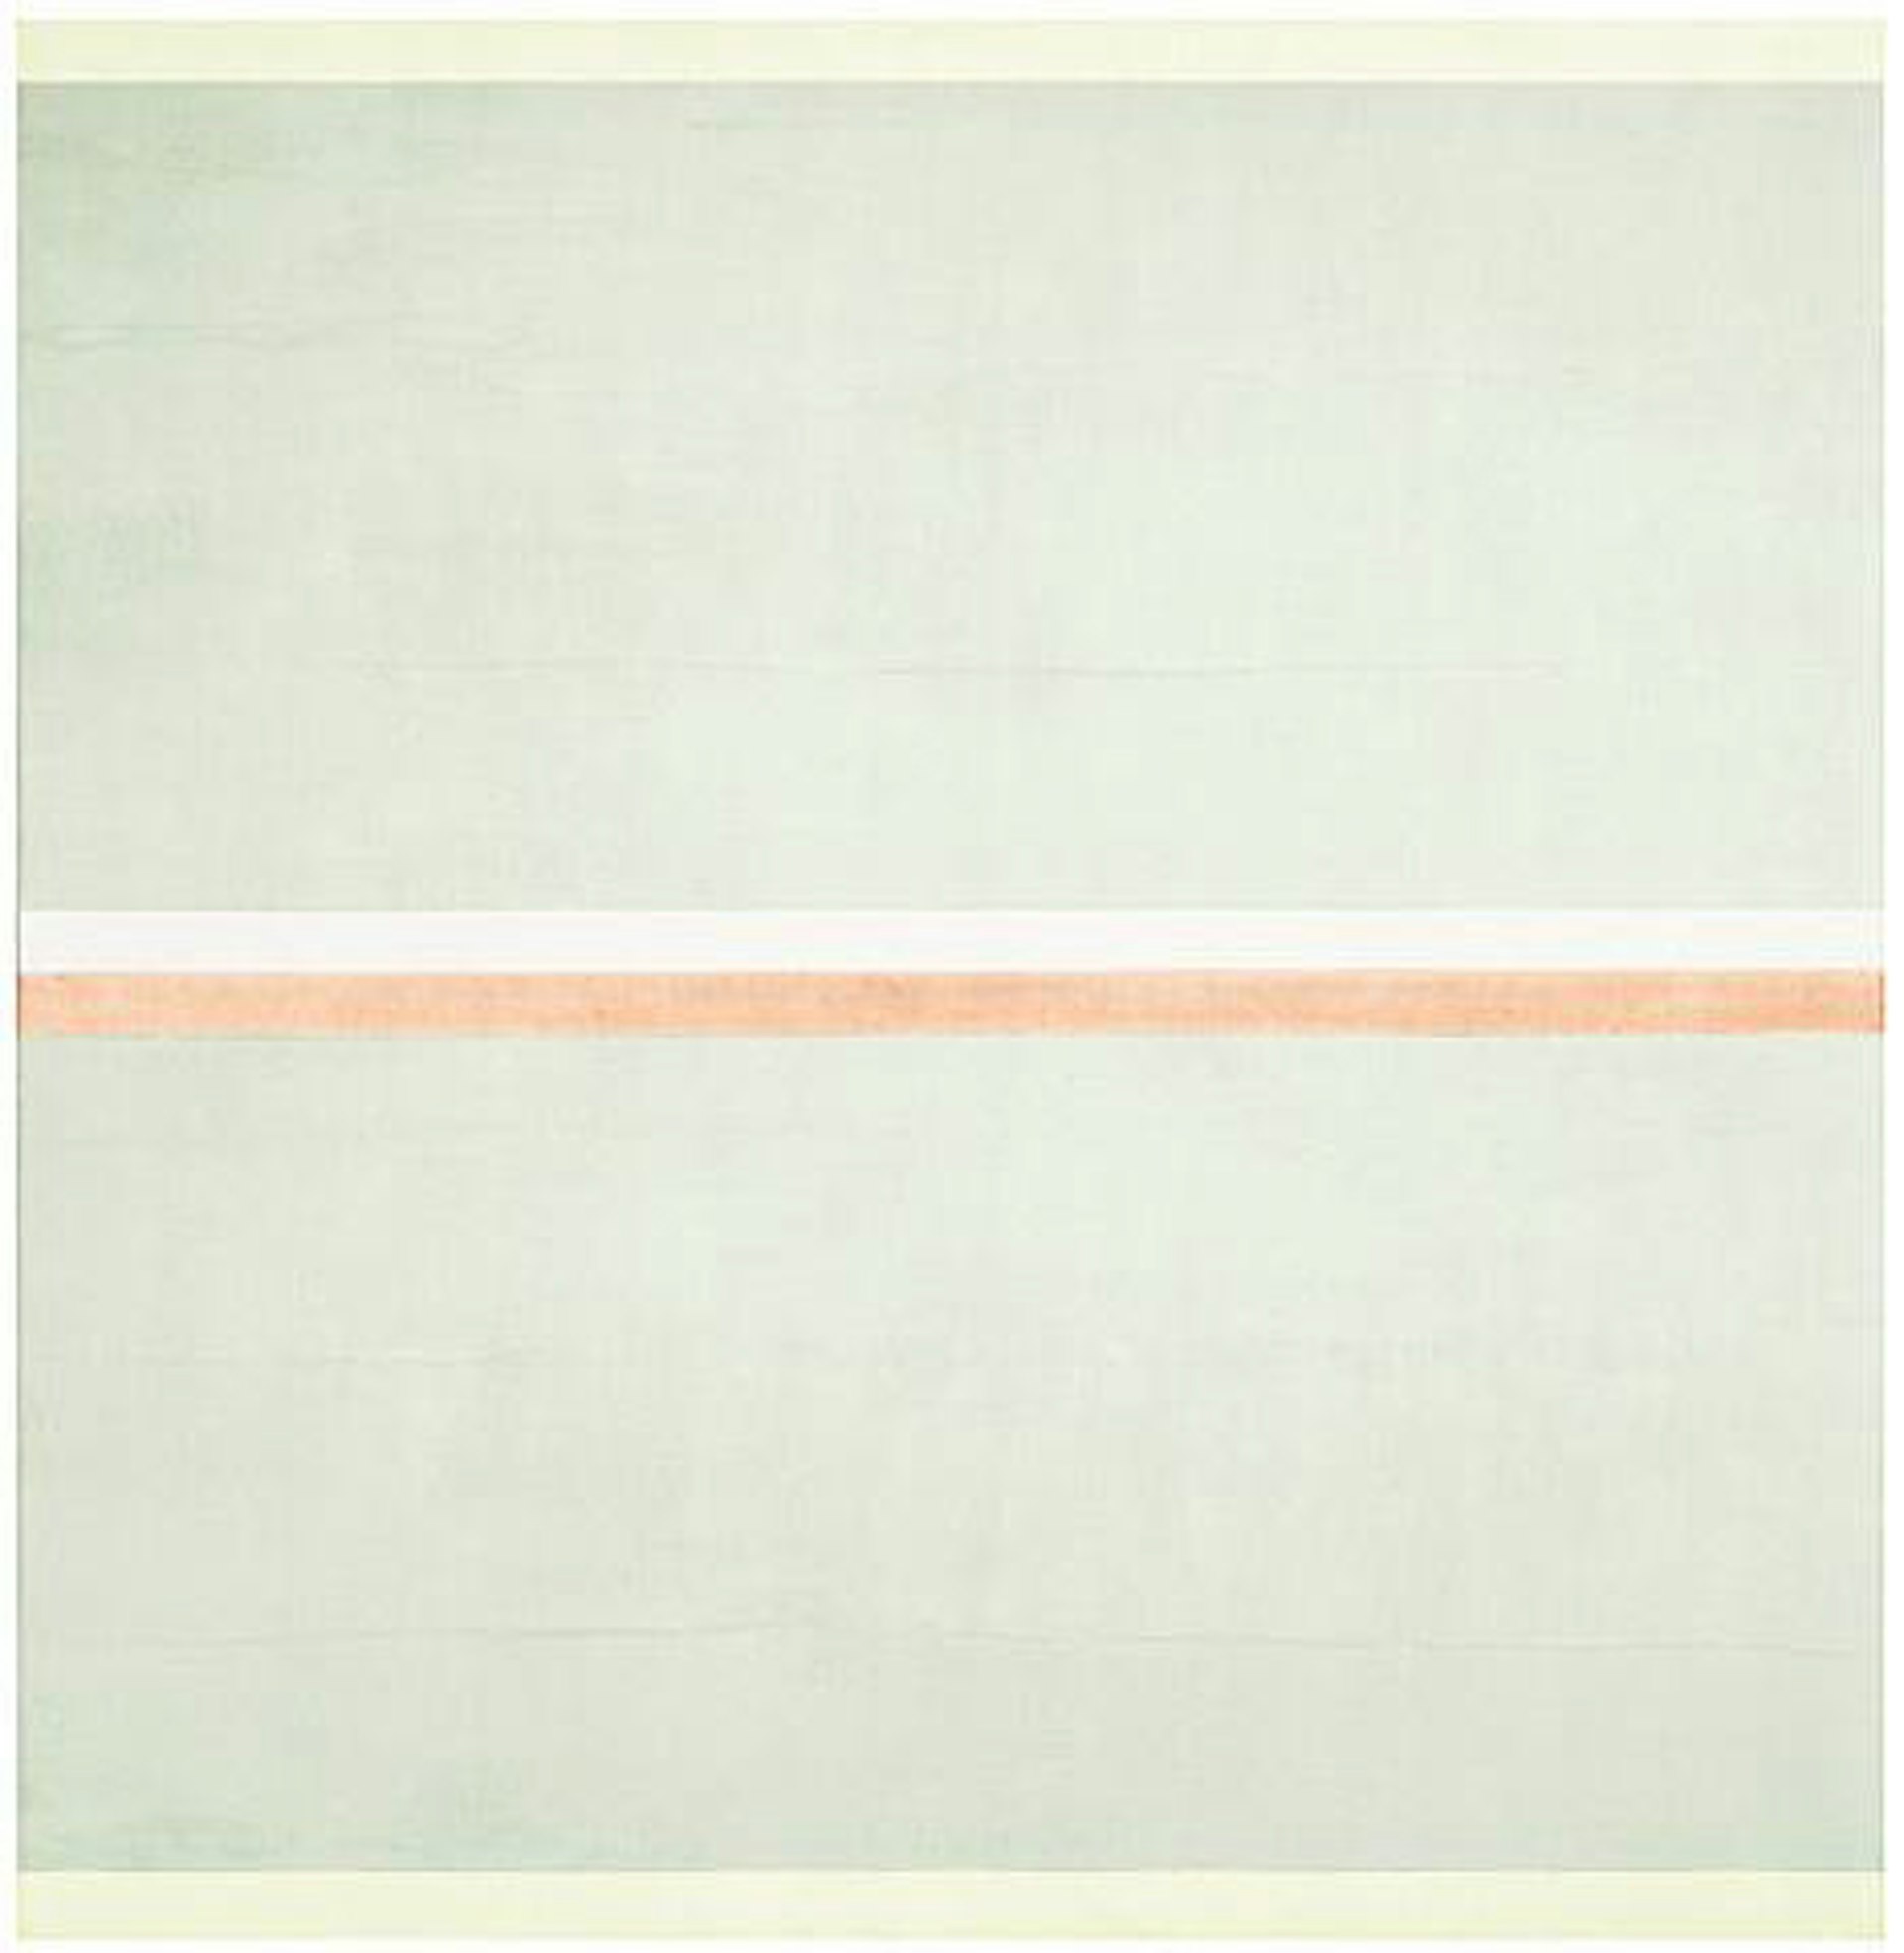 Painting by Agnes Martin.